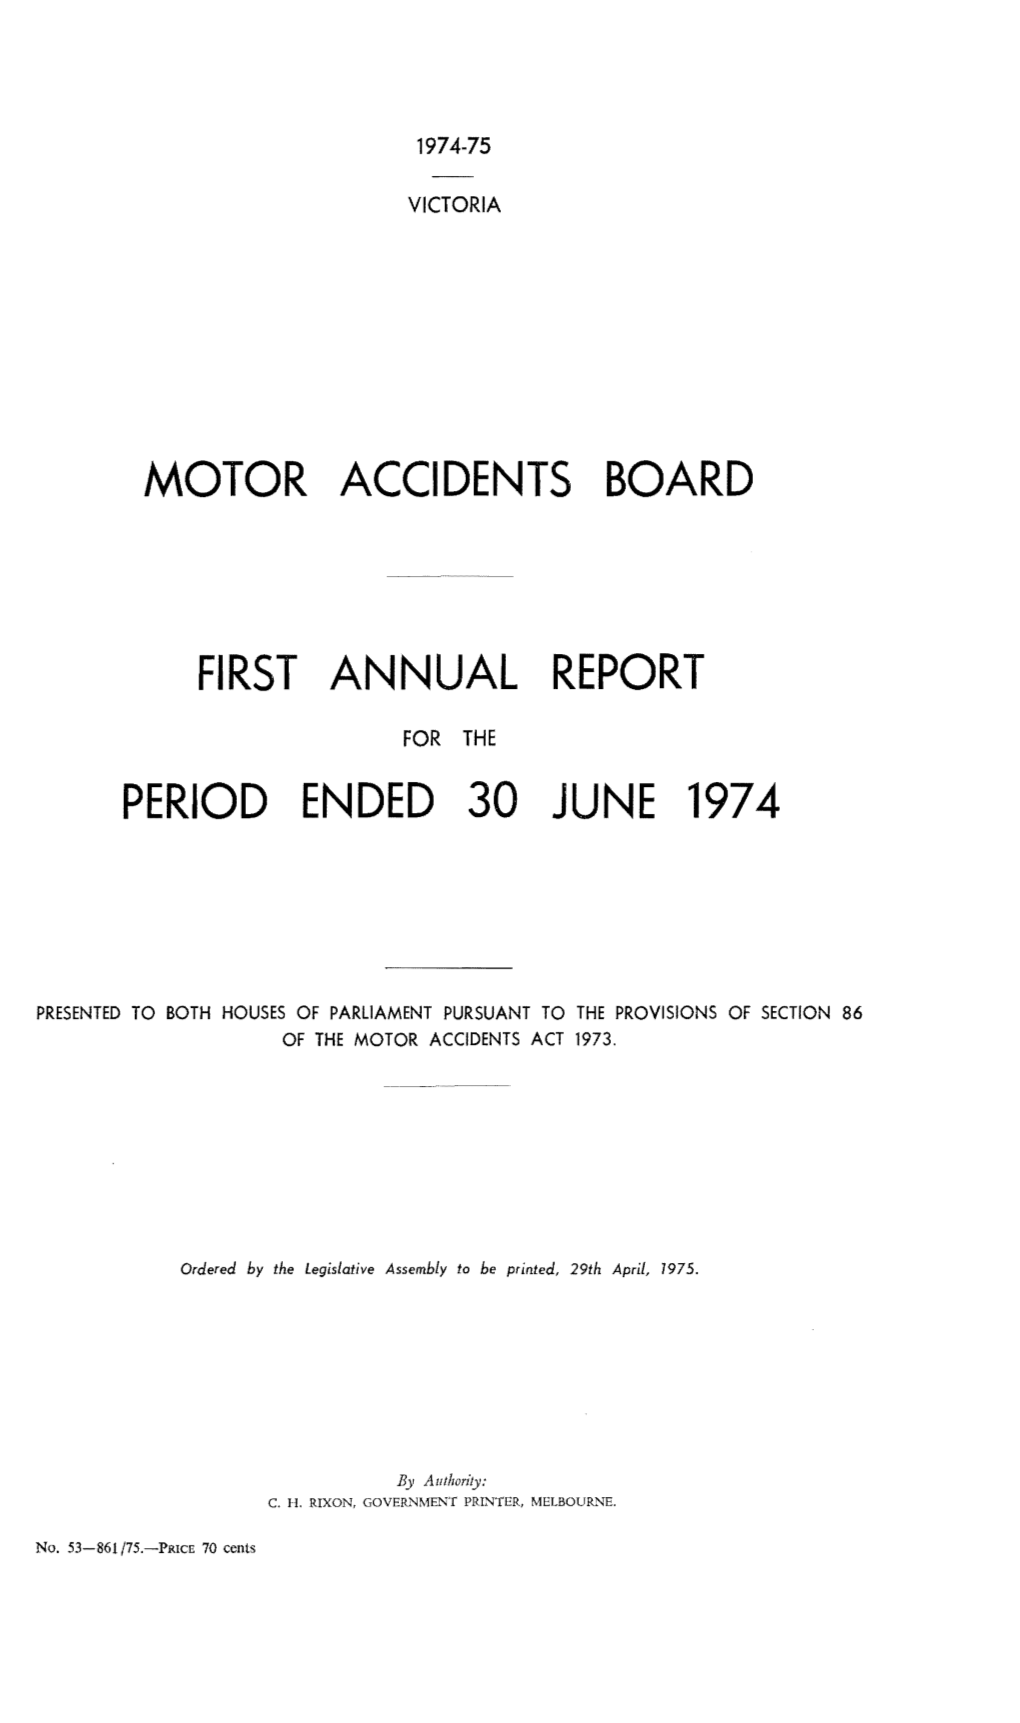 Motor Accidents Board First Annual Report